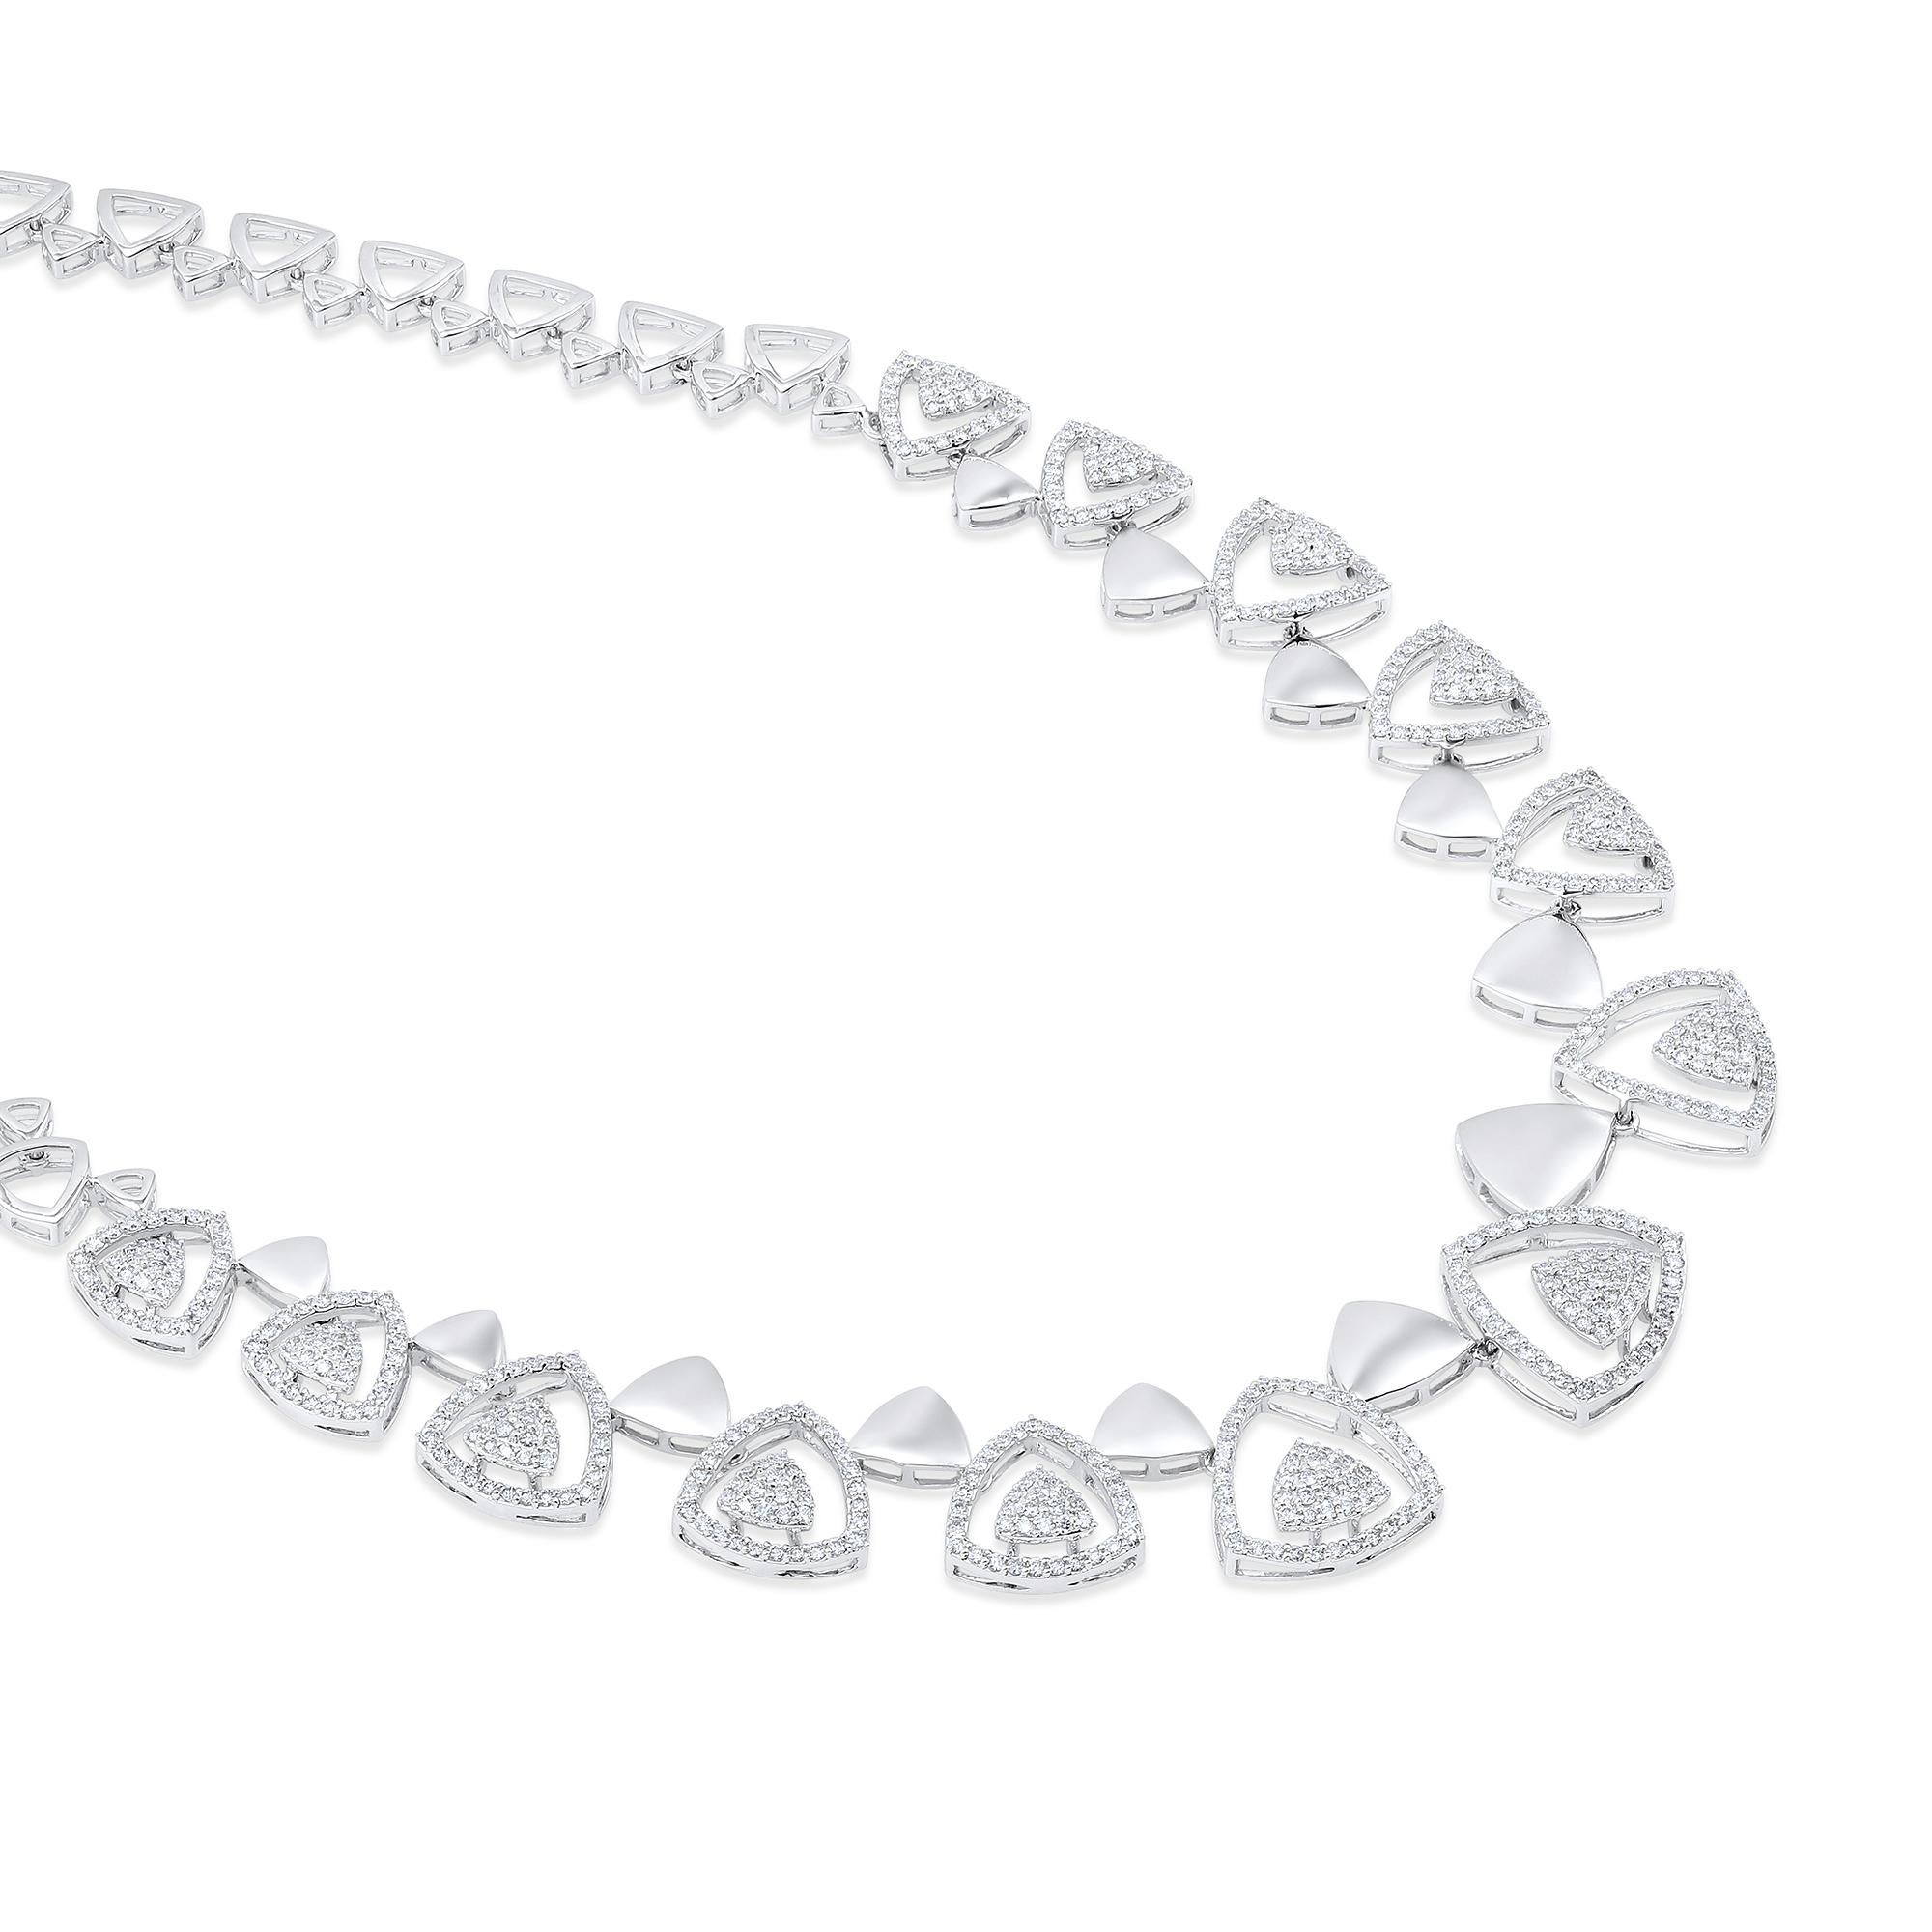 Crafted in 31.78 grams of 14-karat White Gold, contains 713 Stones of Round Diamonds with a total of 3.75-Carats in G-H Color and VS Clarity. The Necklace is 18-inch in Length.

CONTEMPORARY AND TIMELESS ESSENCE: Crafted in 14-karat/18-karat with